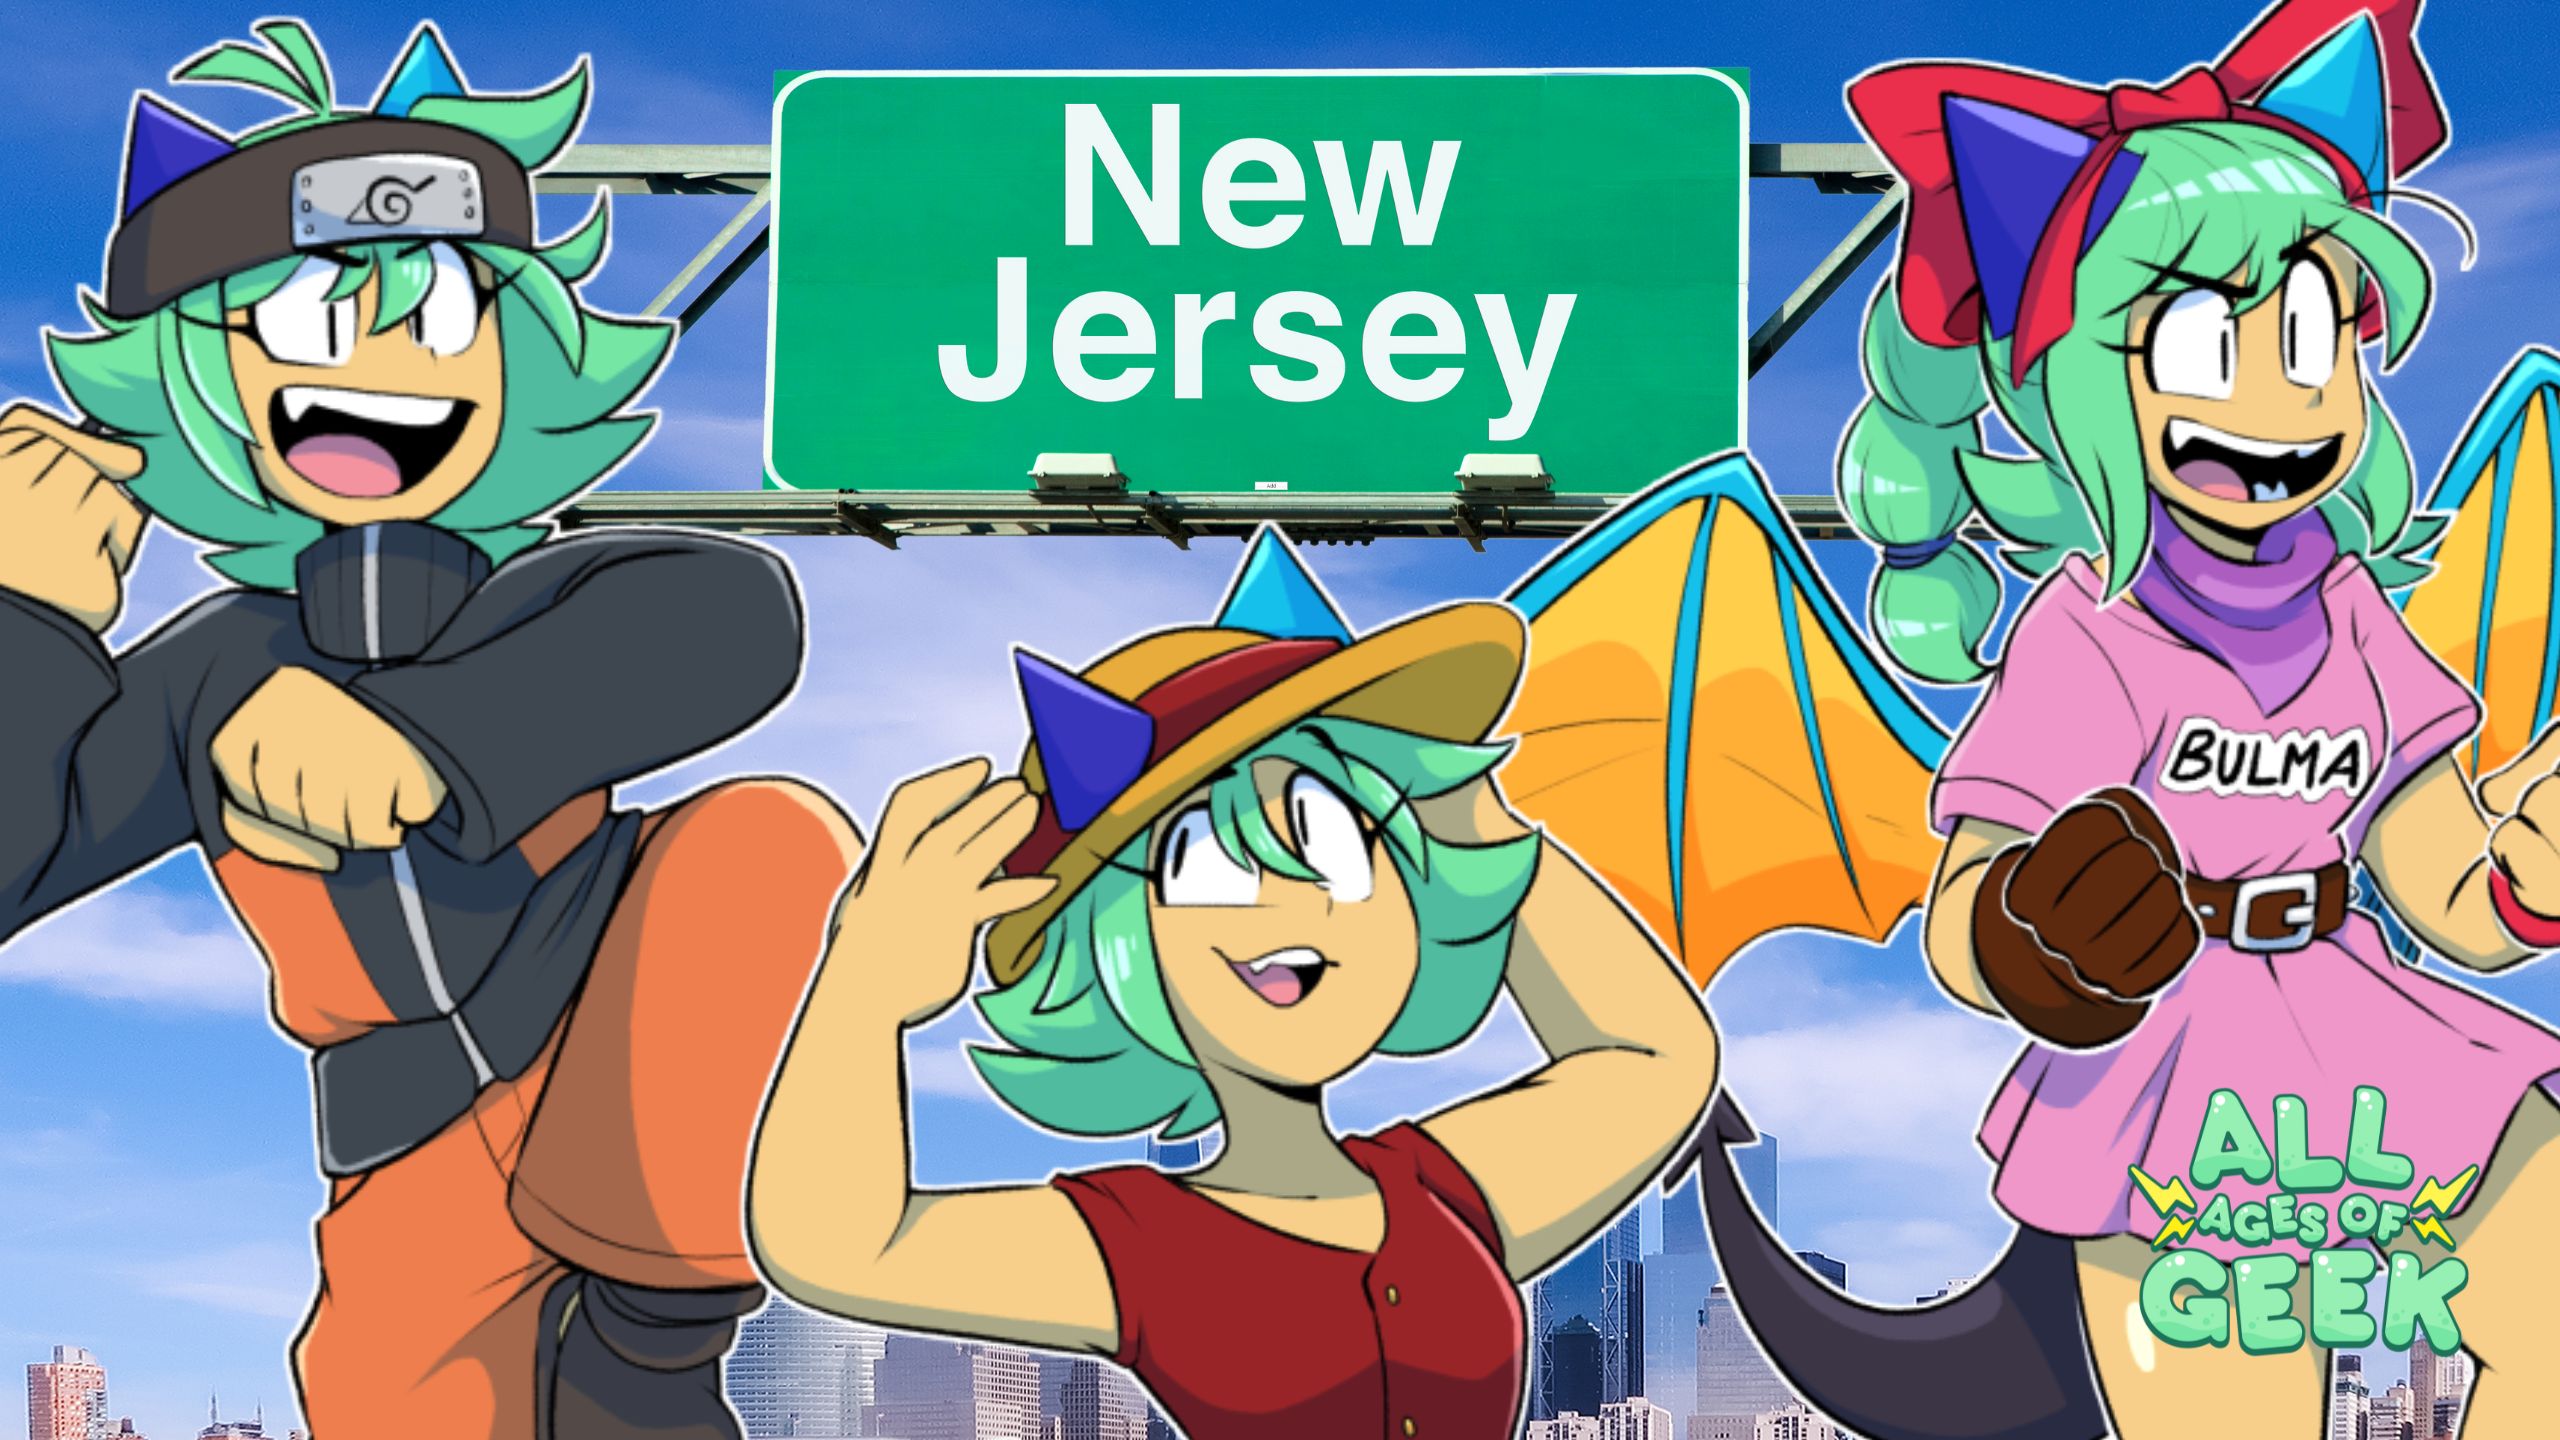 Exploring New Jersey Geeky Destinations with All Ages of Geek!